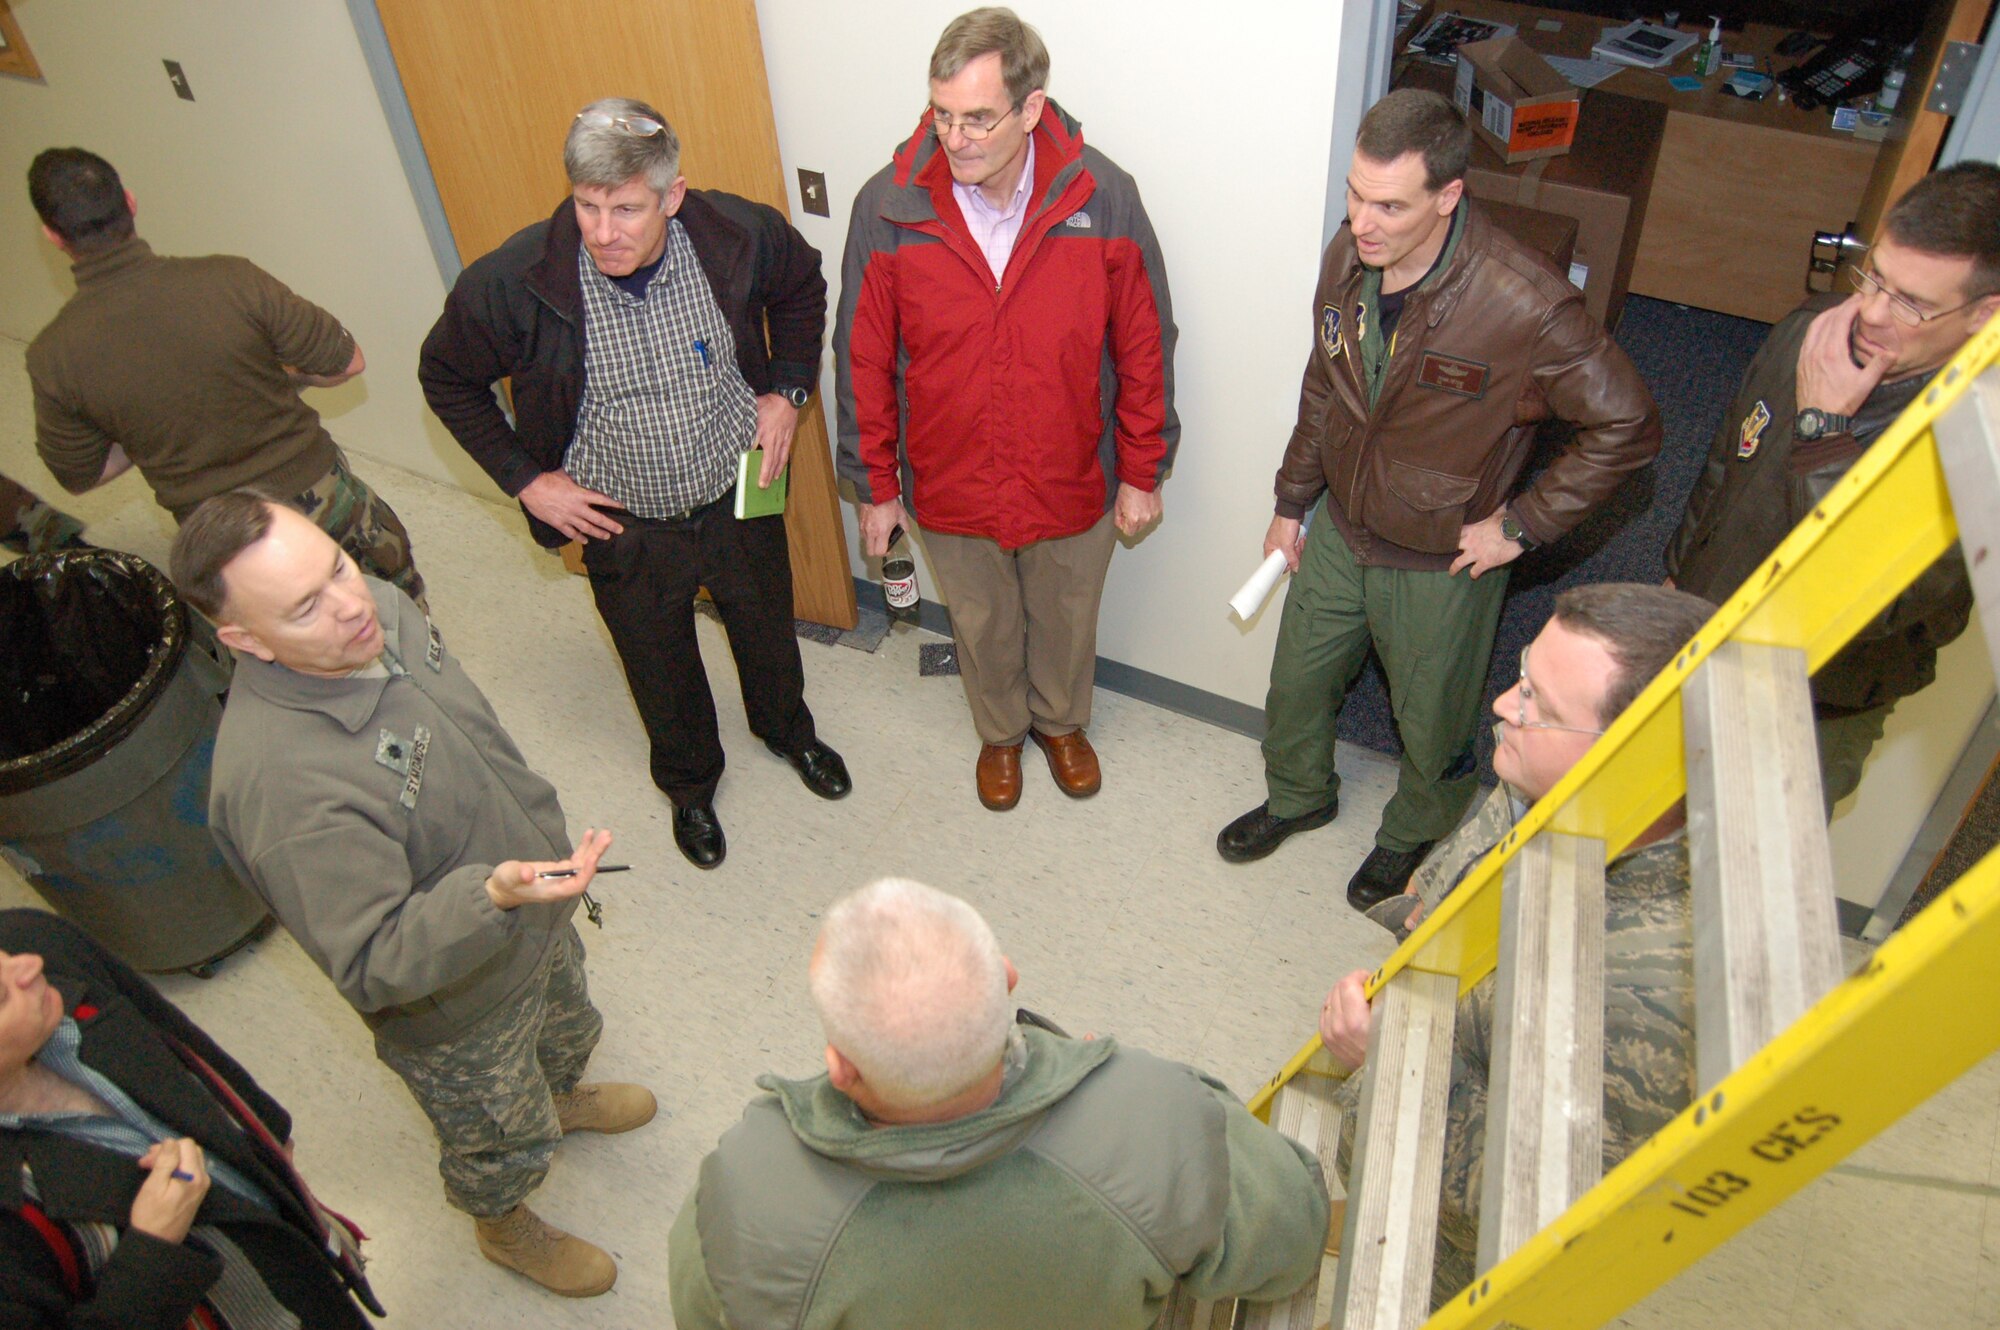 Dave McKenzie and James Luebbe from the AOC Weapons System Integrator team review infrastructure requirements with Conn. Air National Guard leadership during the building site visit on Thursday, Feb. 4, 2010.  The walkthrough was part of a four-day site survey to determine the Conn. Air National Guard’s level of readiness to accept and support the installation of a 2.5 million dollar equipment suite that will enable the 103rd Air and Space Operations Group to achieve its initial operational capability. (U.S. Air Force photo by Tech. Sgt. Joshua A. Mead)